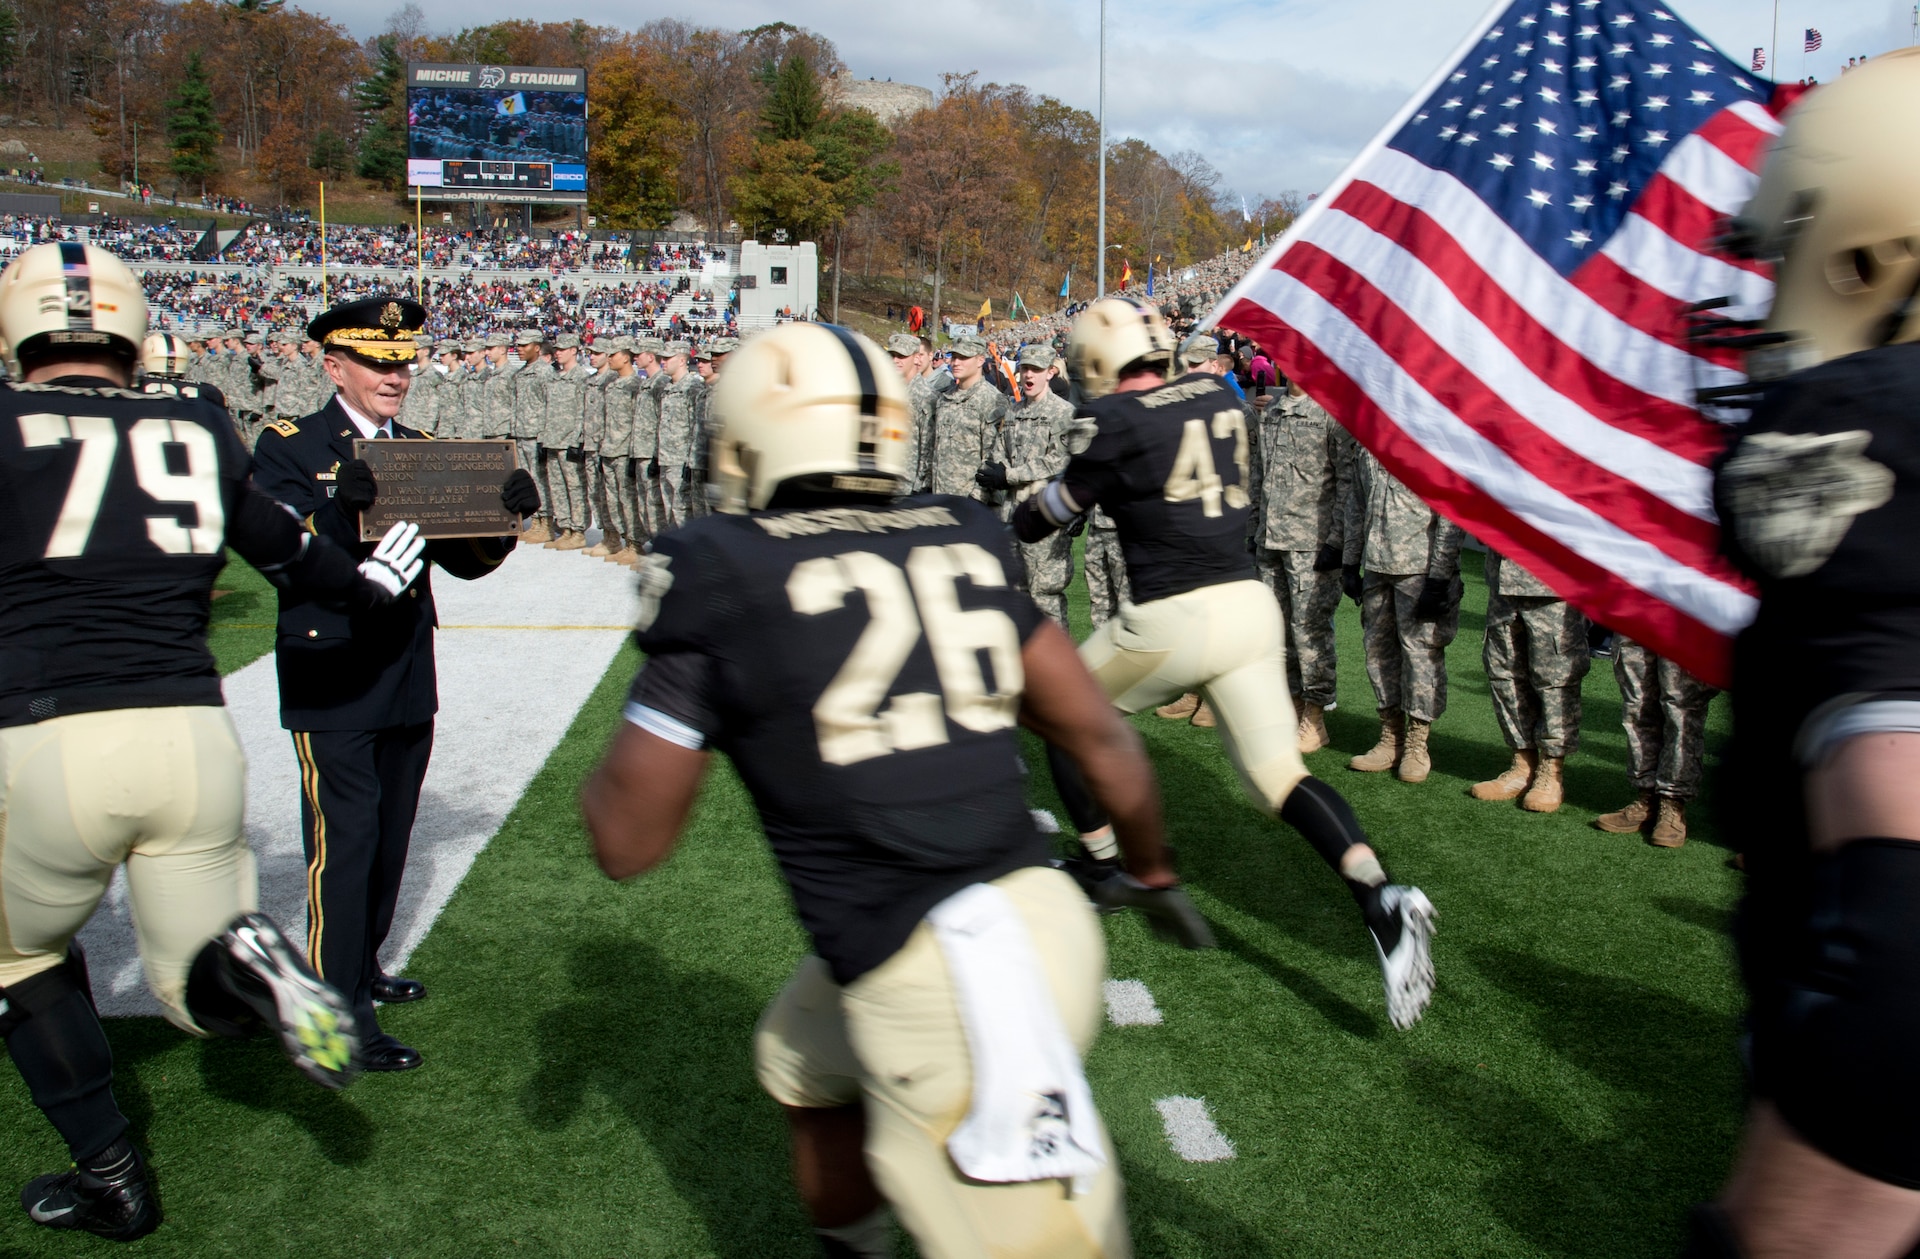 Chairman of the Joint Chiefs of Staff Gen. Martin E. Dempsey holds the Gen. George C. Marshall plaque for Army Black Knight football players to touch as they rush the field to start the Army versus Air Force game in West Point, N.Y., Nov. 3, 2012.